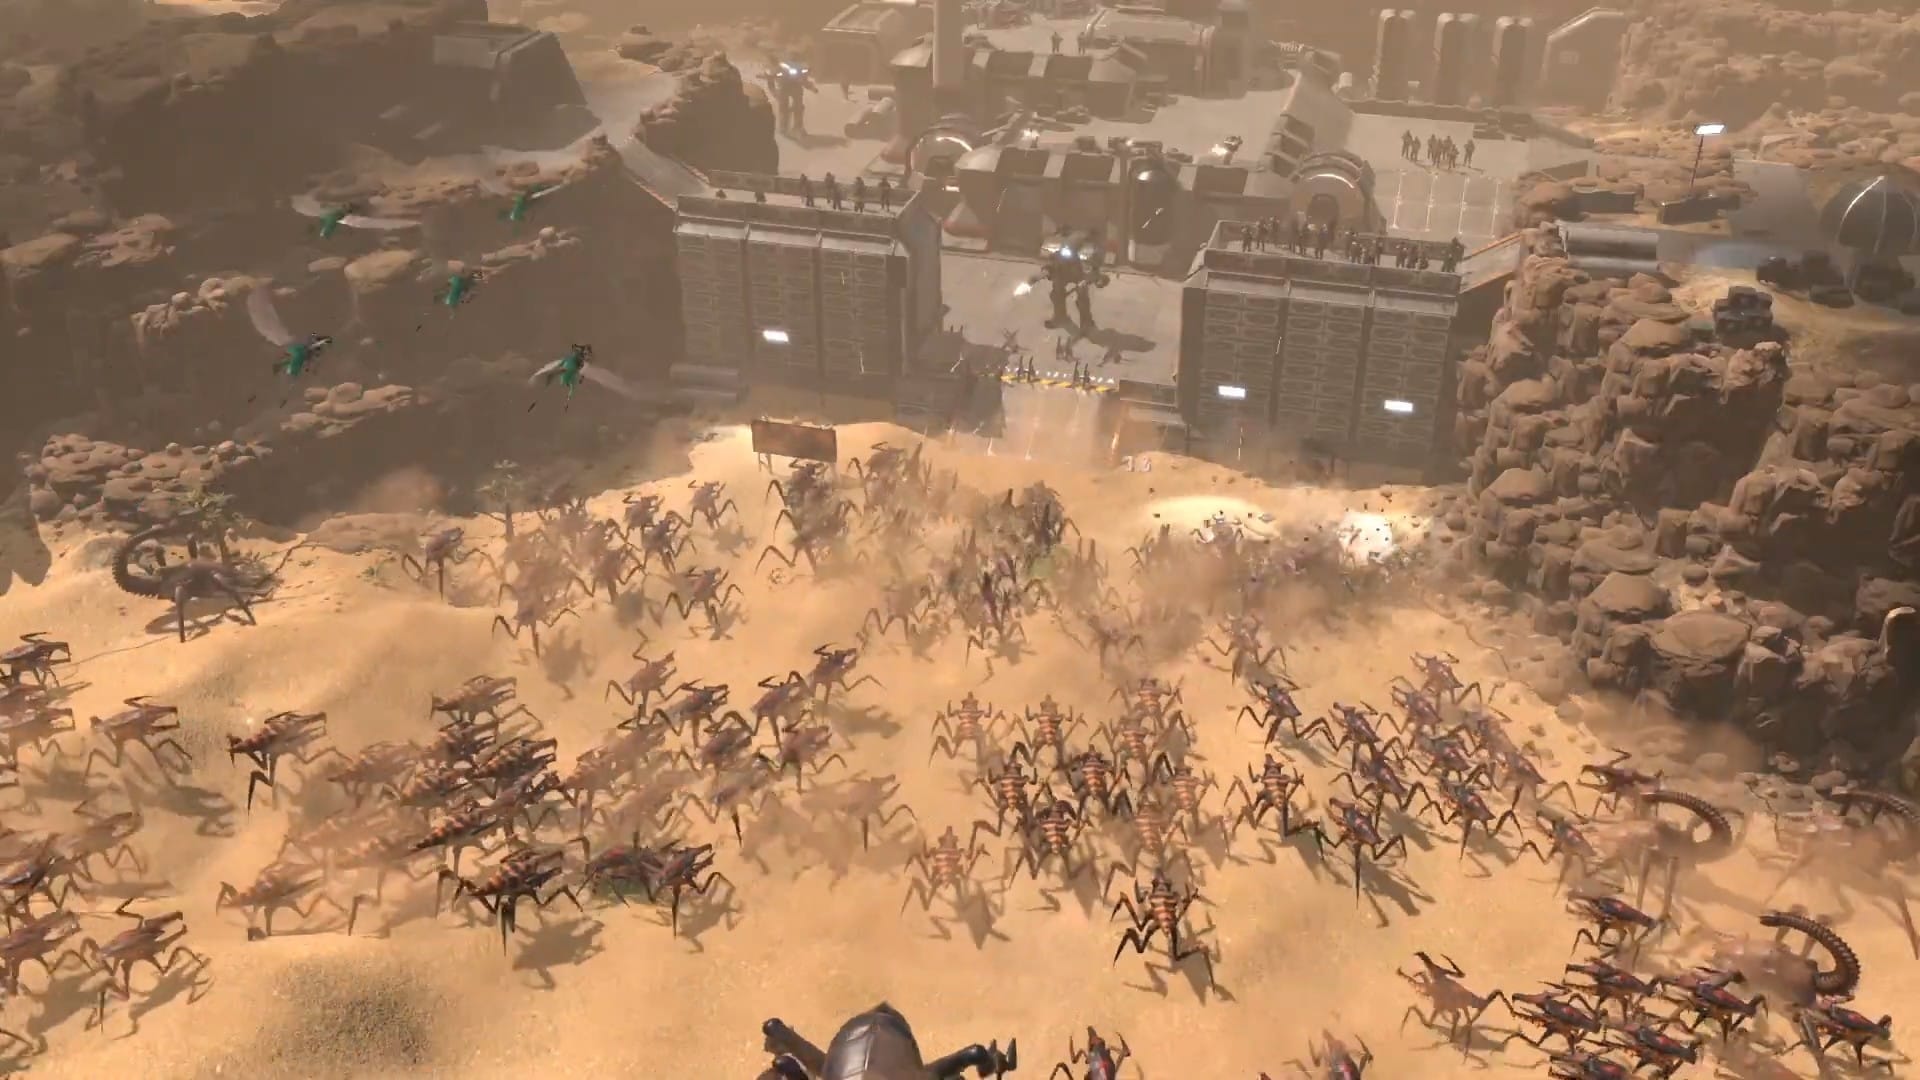 Blast Bugs in Starship Troopers Command, Arriving 2020